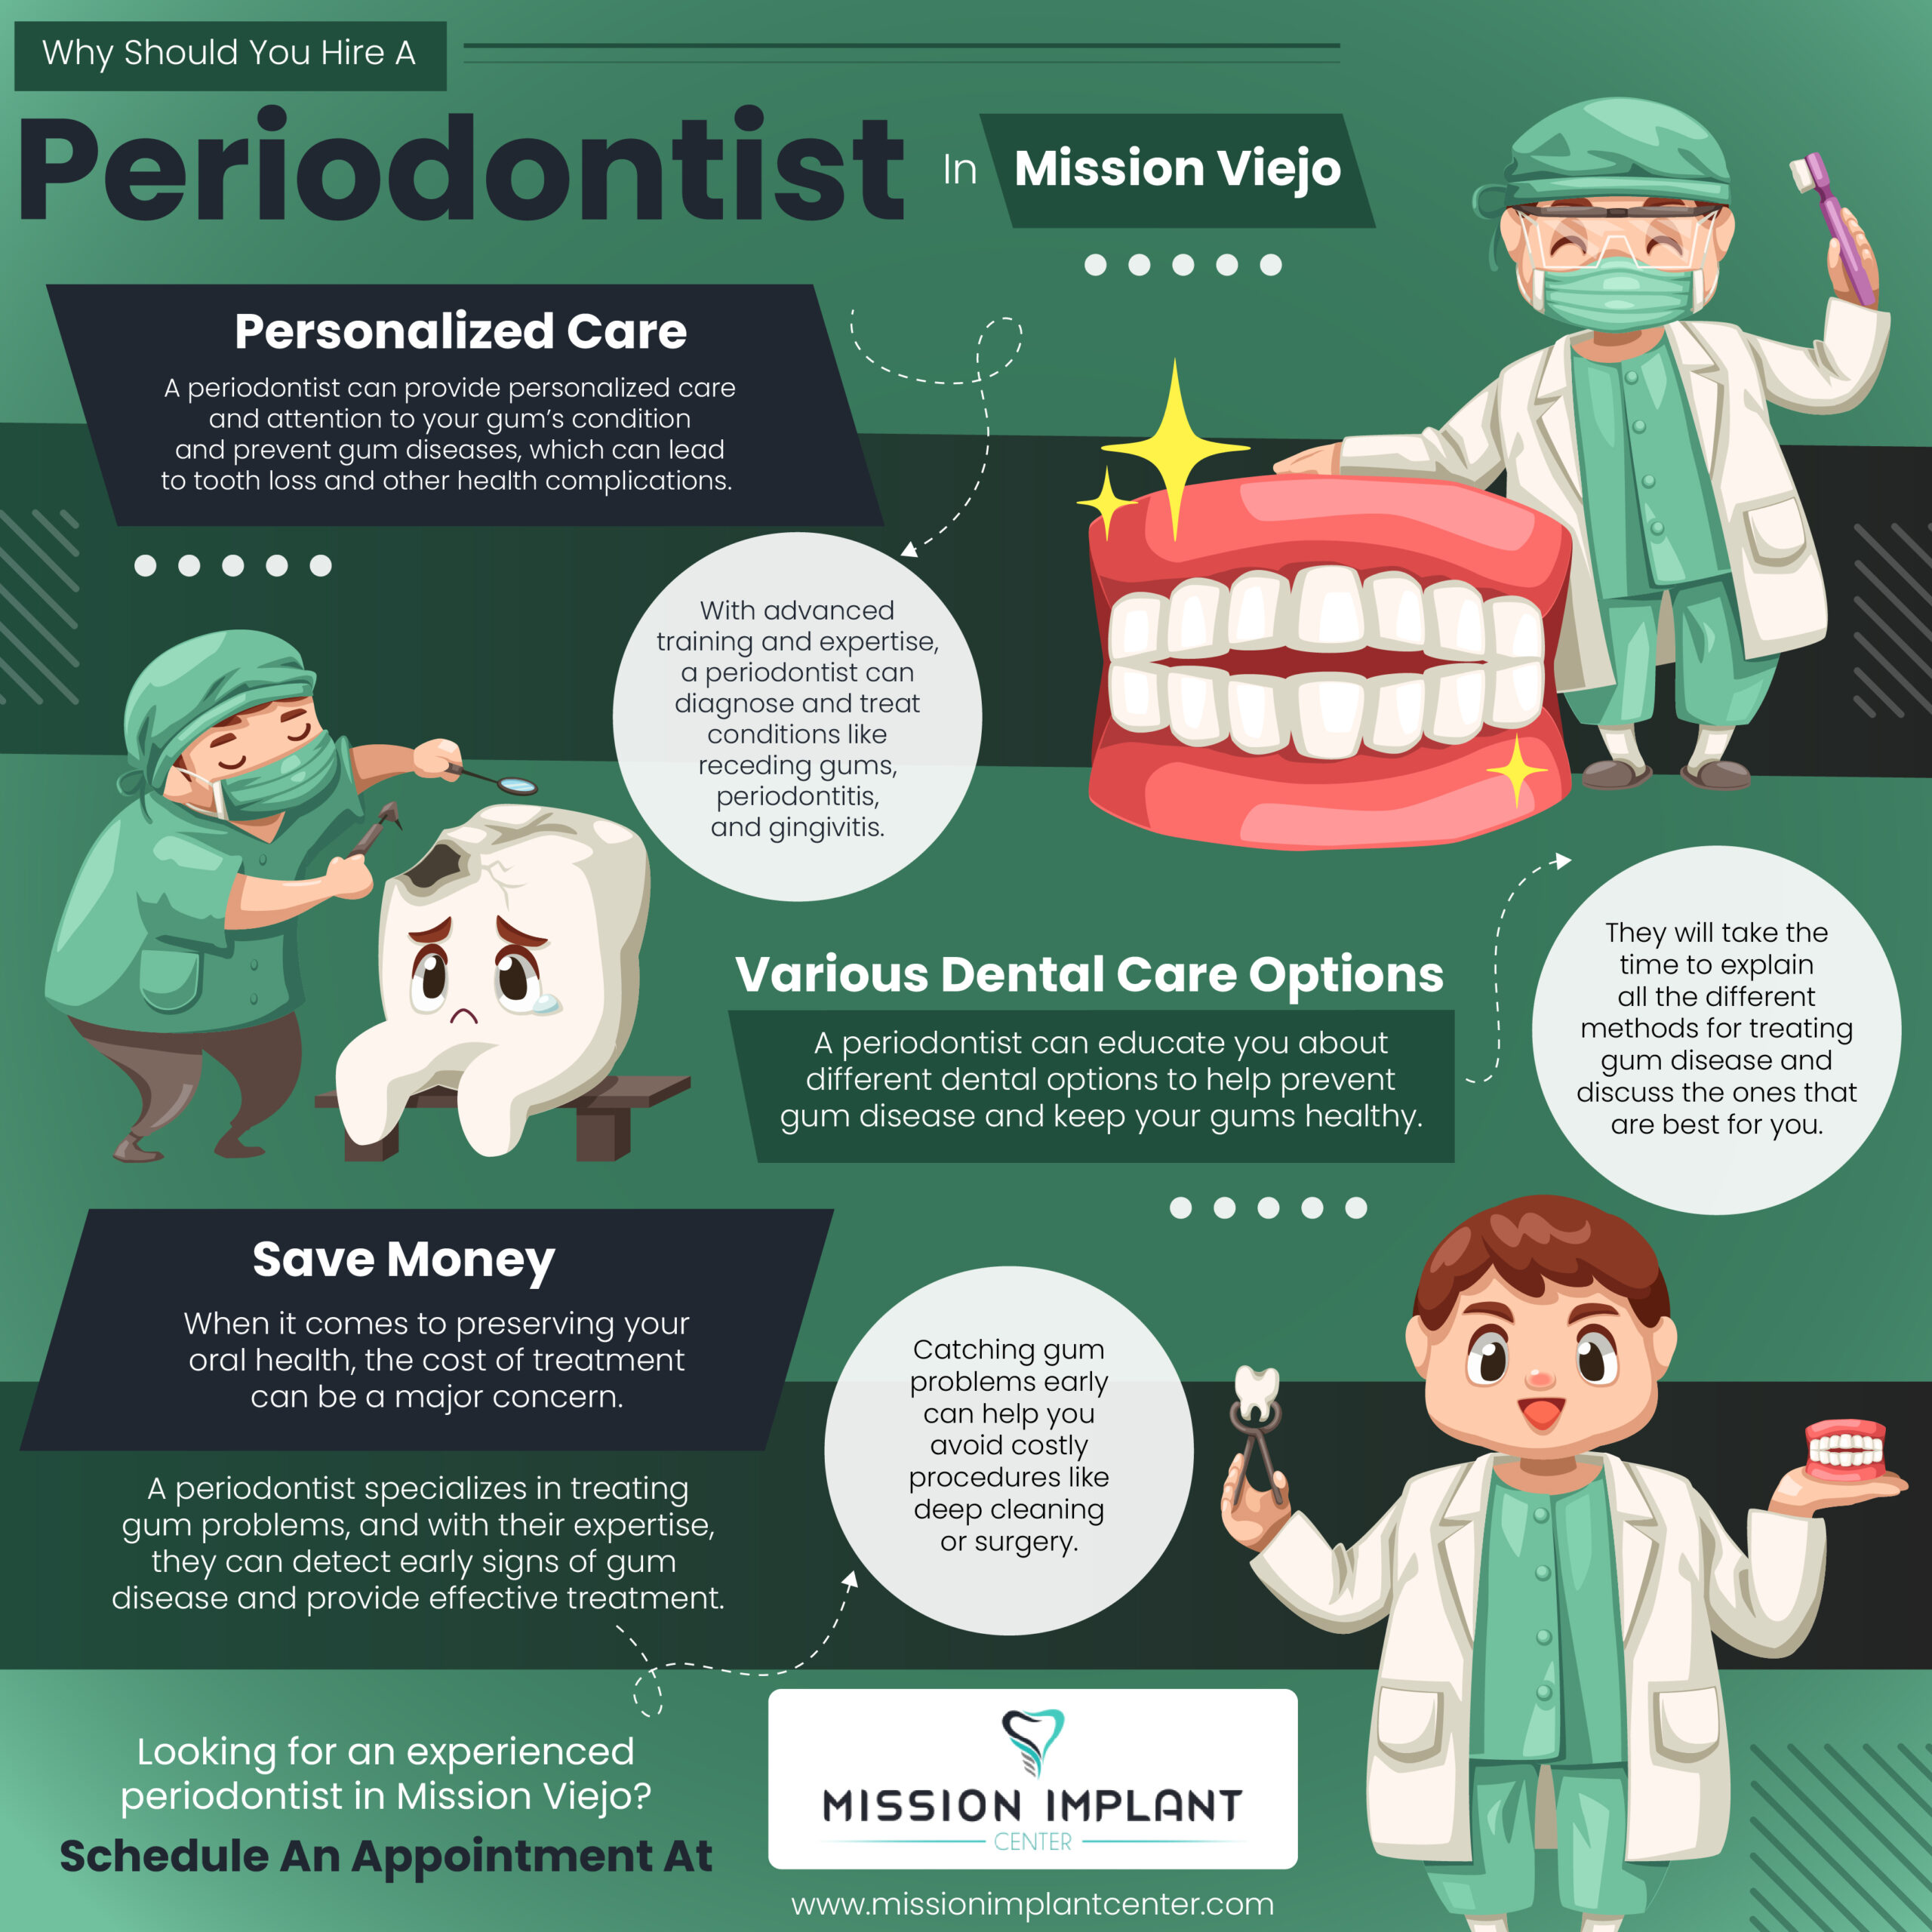 Why Should You Hire A Periodontist In Mission Viejo